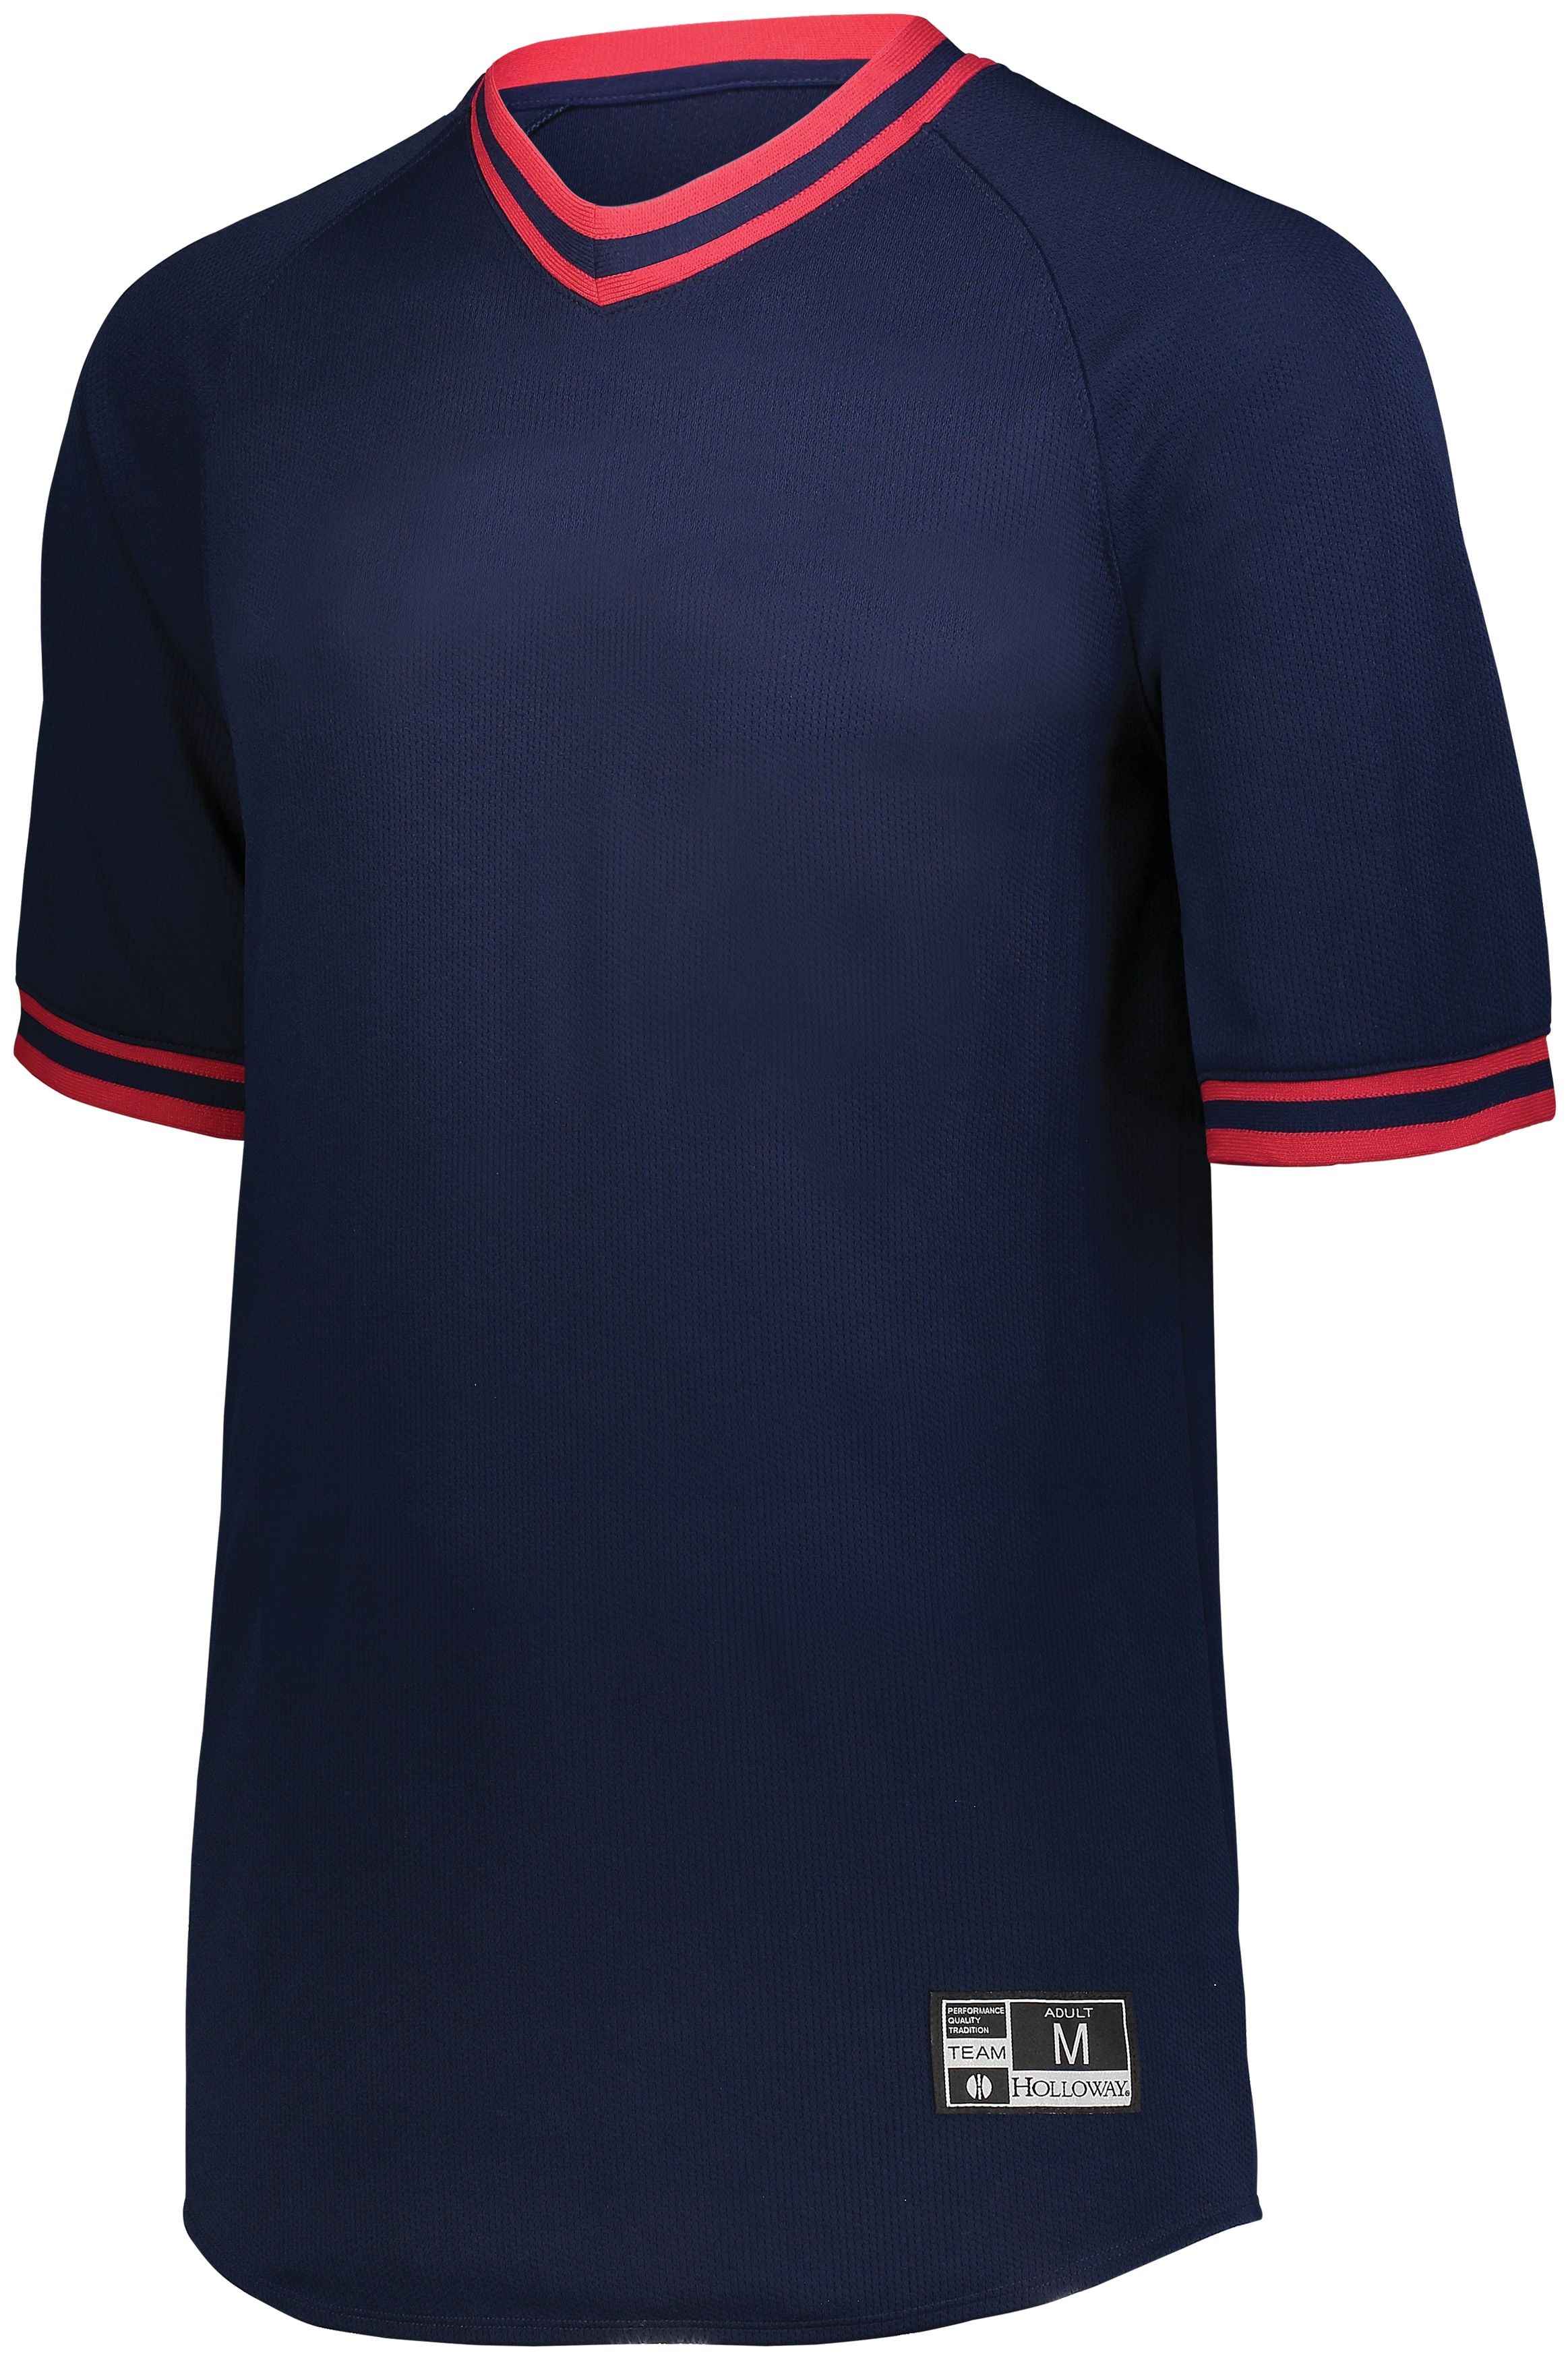 Holloway Retro V-Neck Baseball Jersey in Navy/Scarlet  -Part of the Adult, Adult-Jersey, Baseball, Holloway, Shirts, All-Sports, All-Sports-1 product lines at KanaleyCreations.com